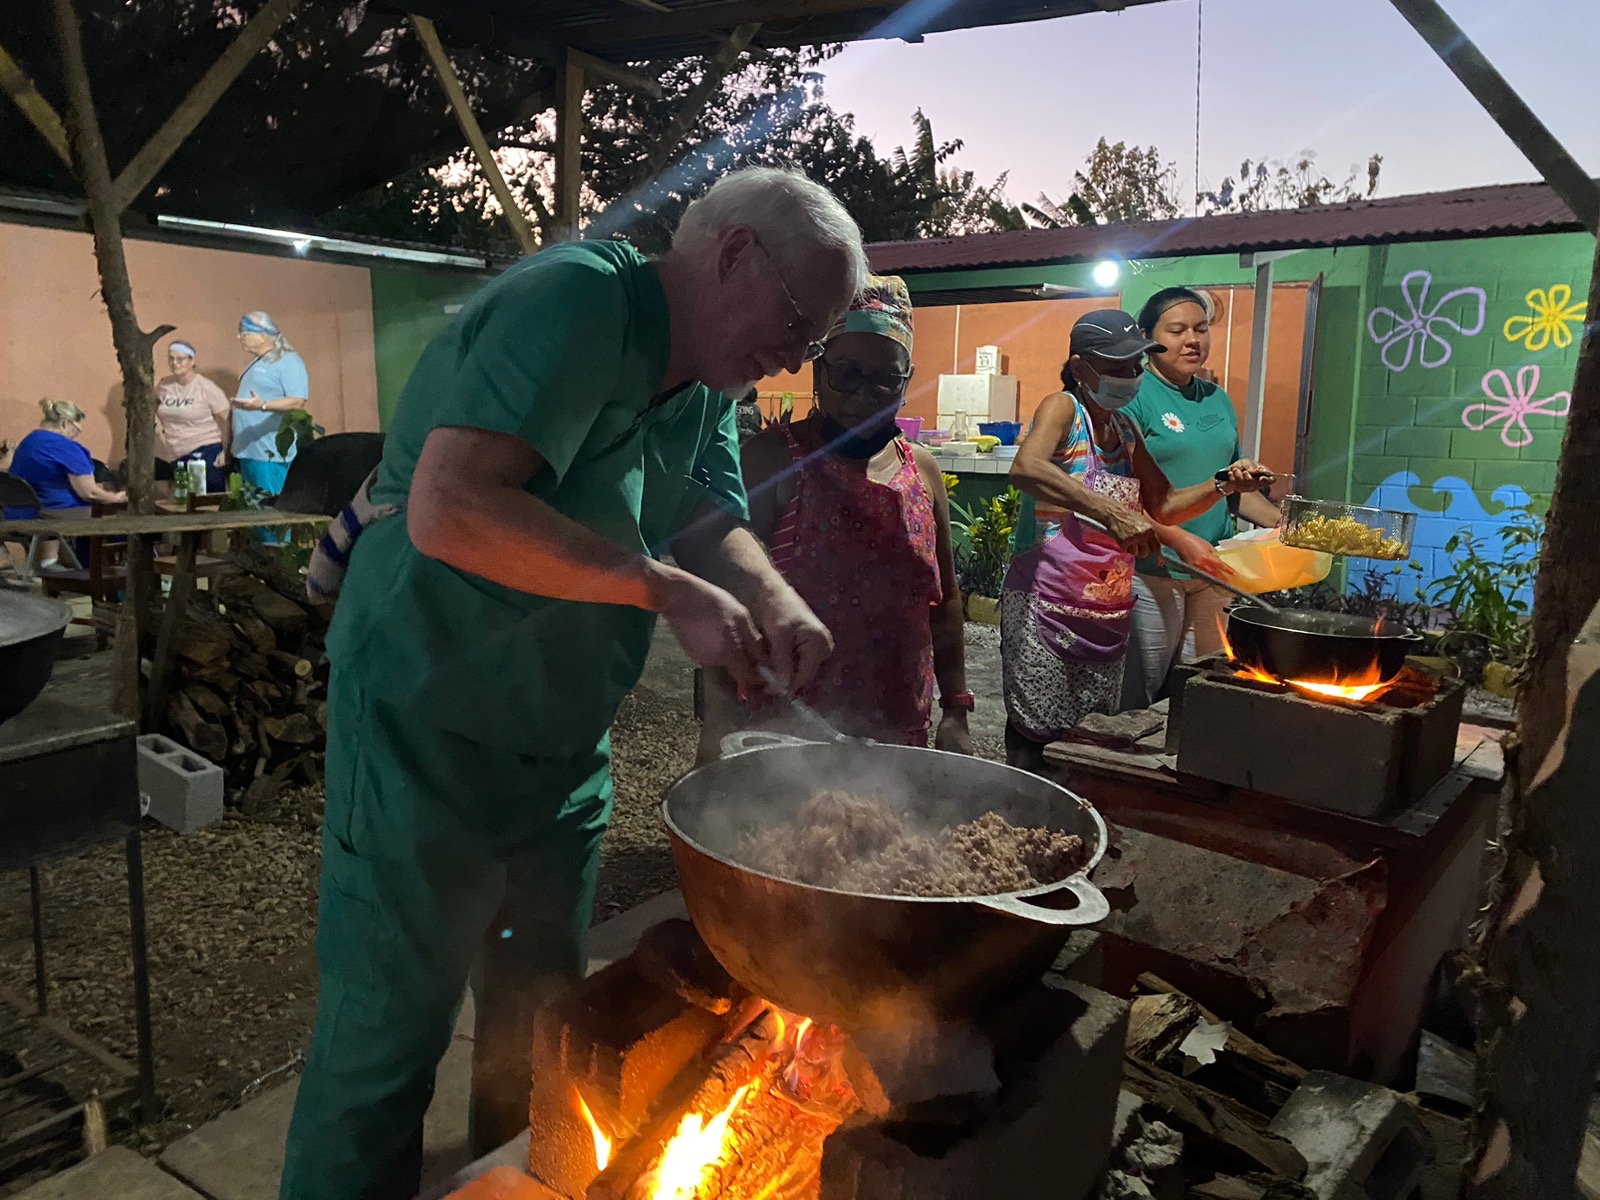 Cooking in Costa Rica